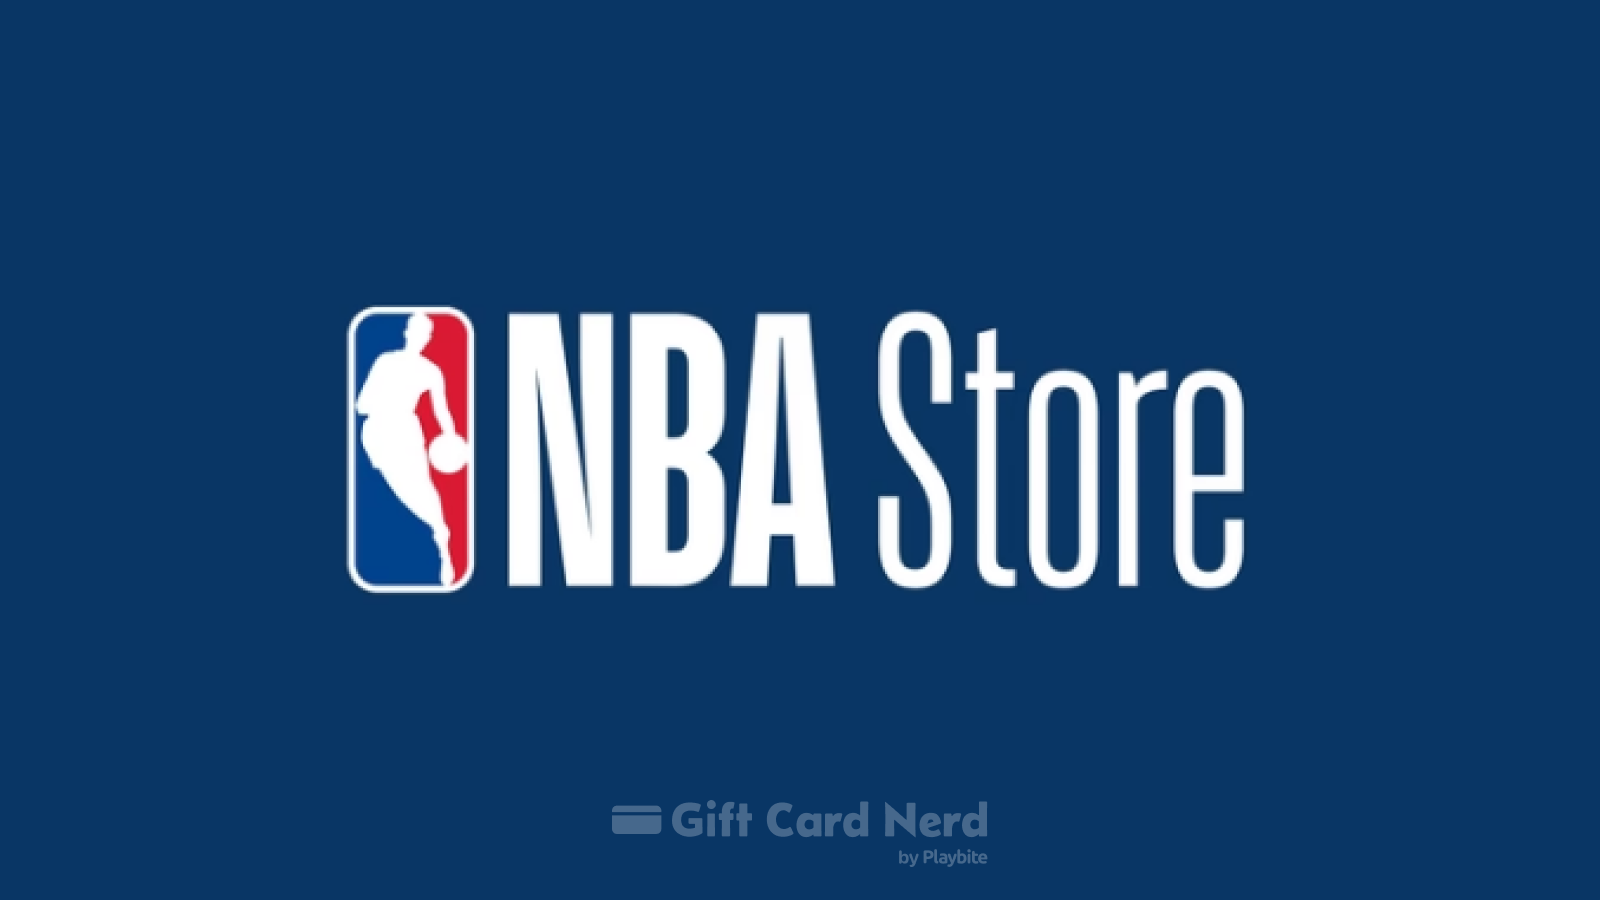 Can You Buy NBA Store Gift Cards at GameStop?